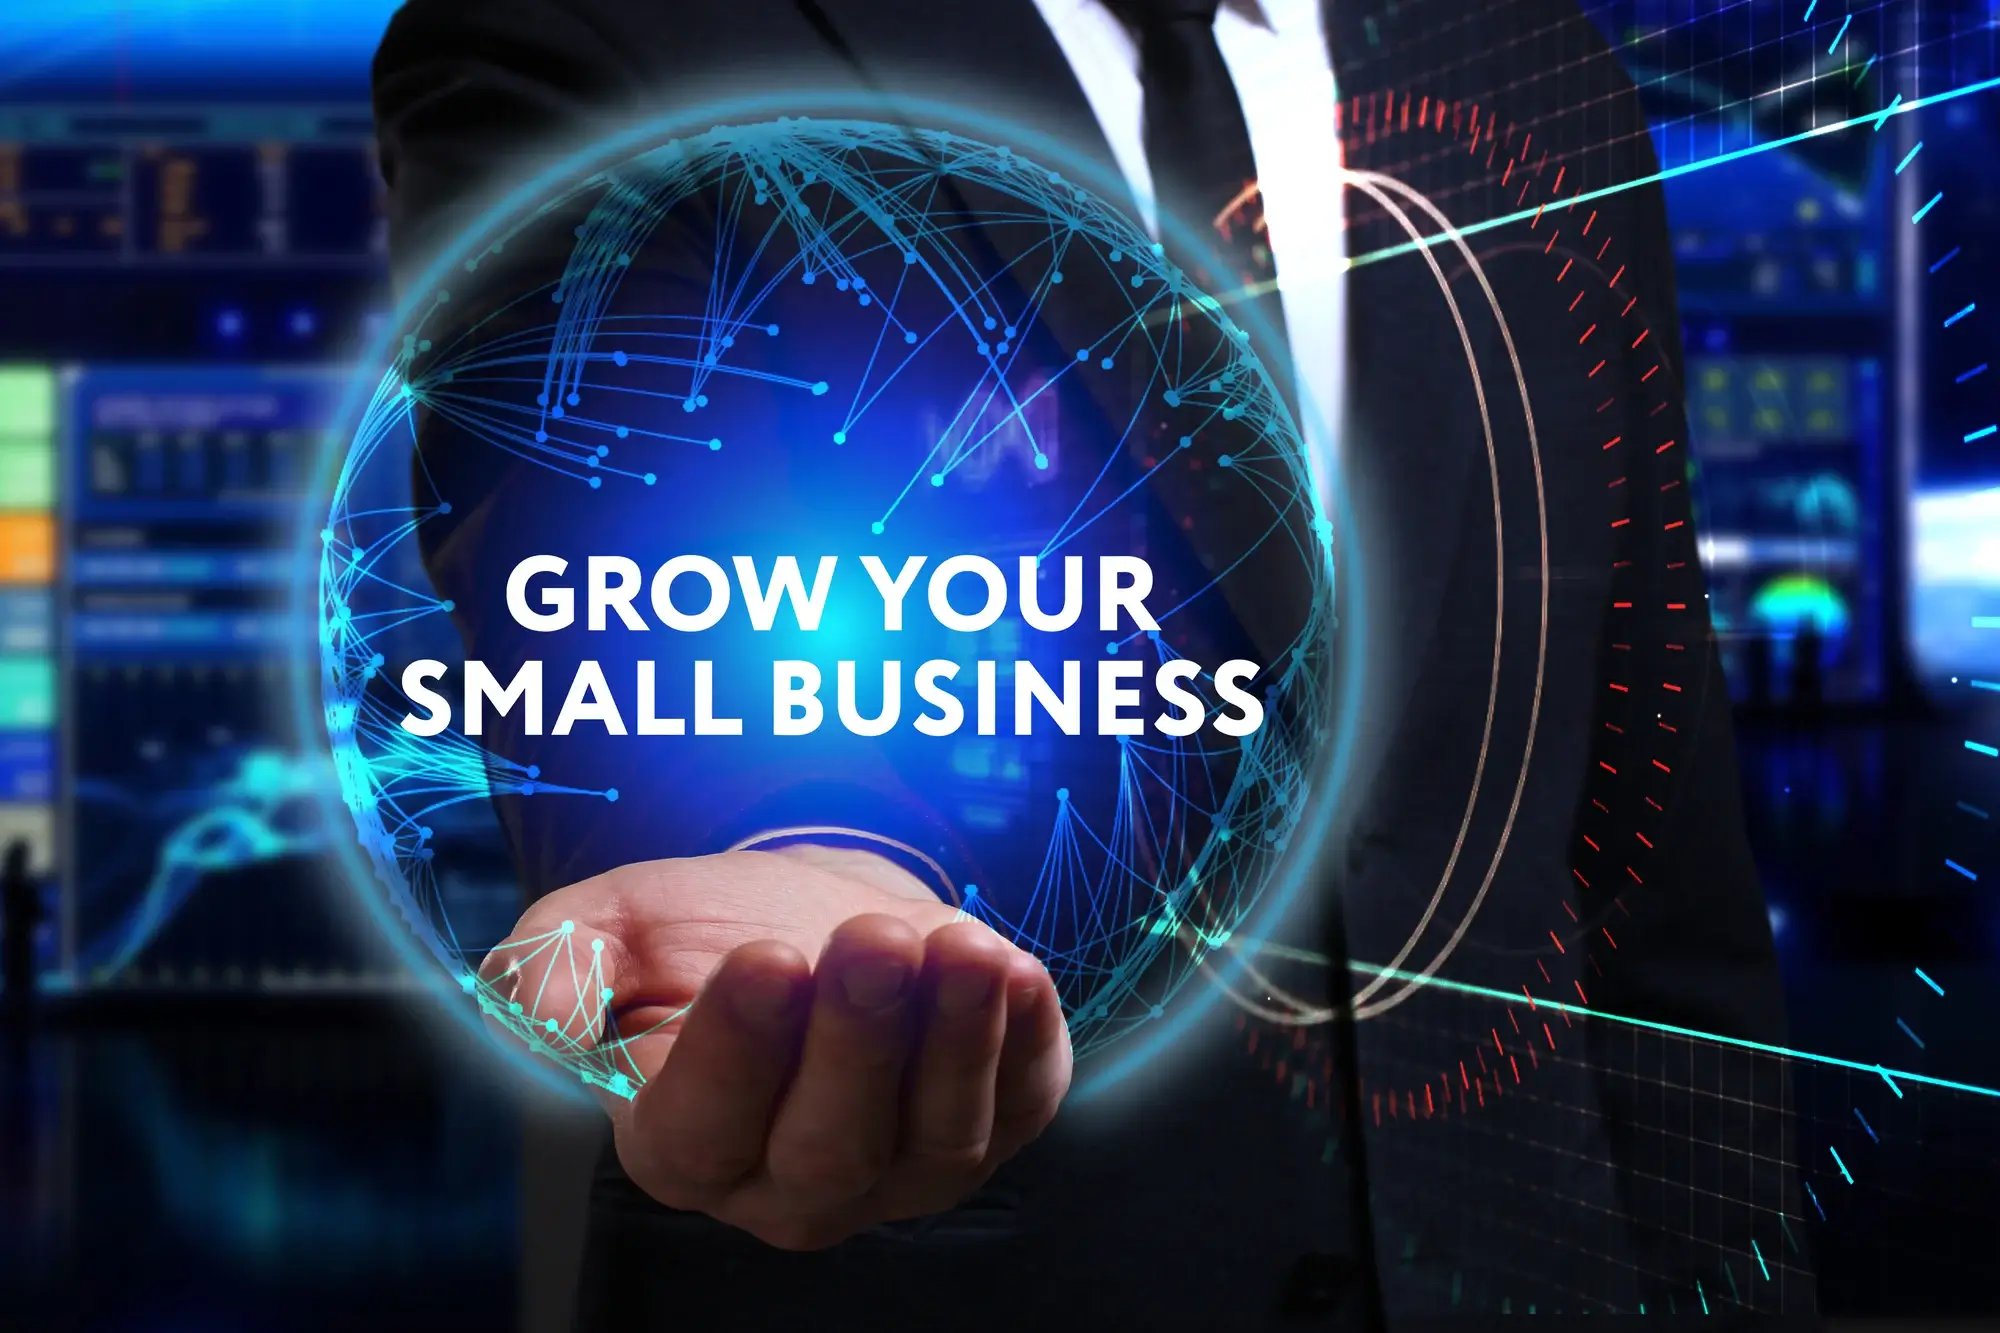 grow your small business shutterstock_559468654-1